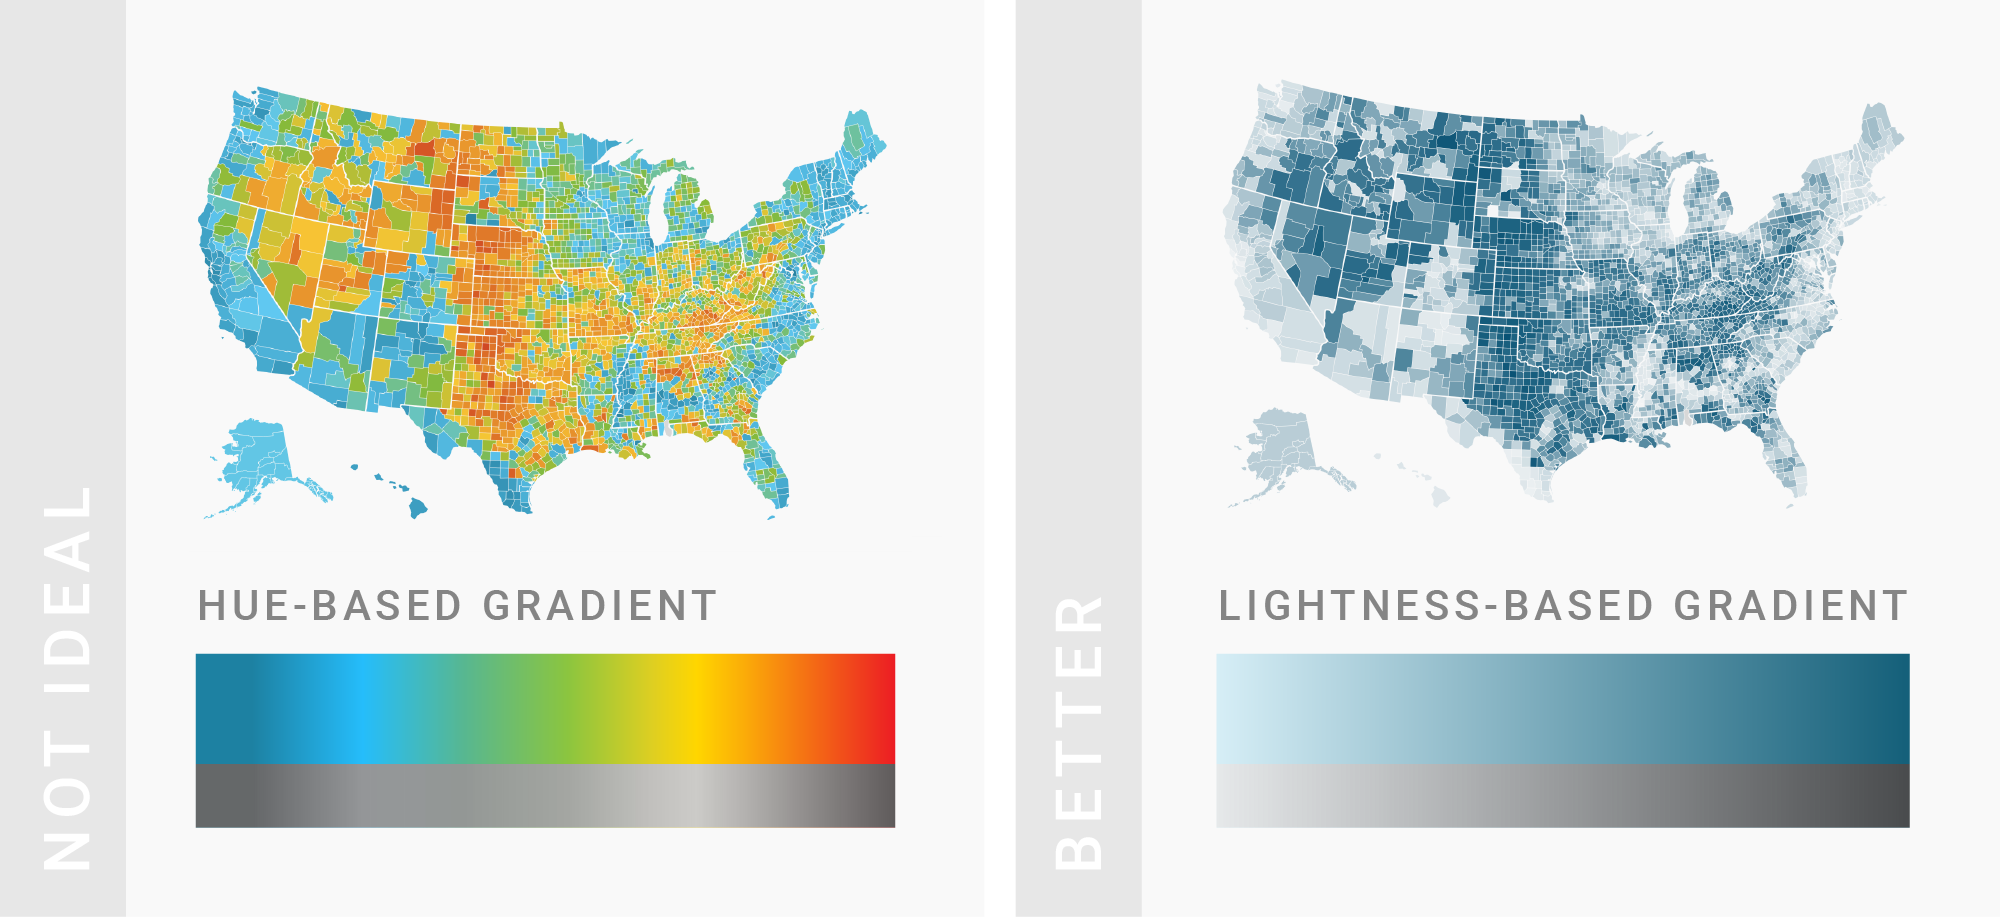 What to consider when choosing colors for data visualization? (from academy.datawrapper.de)